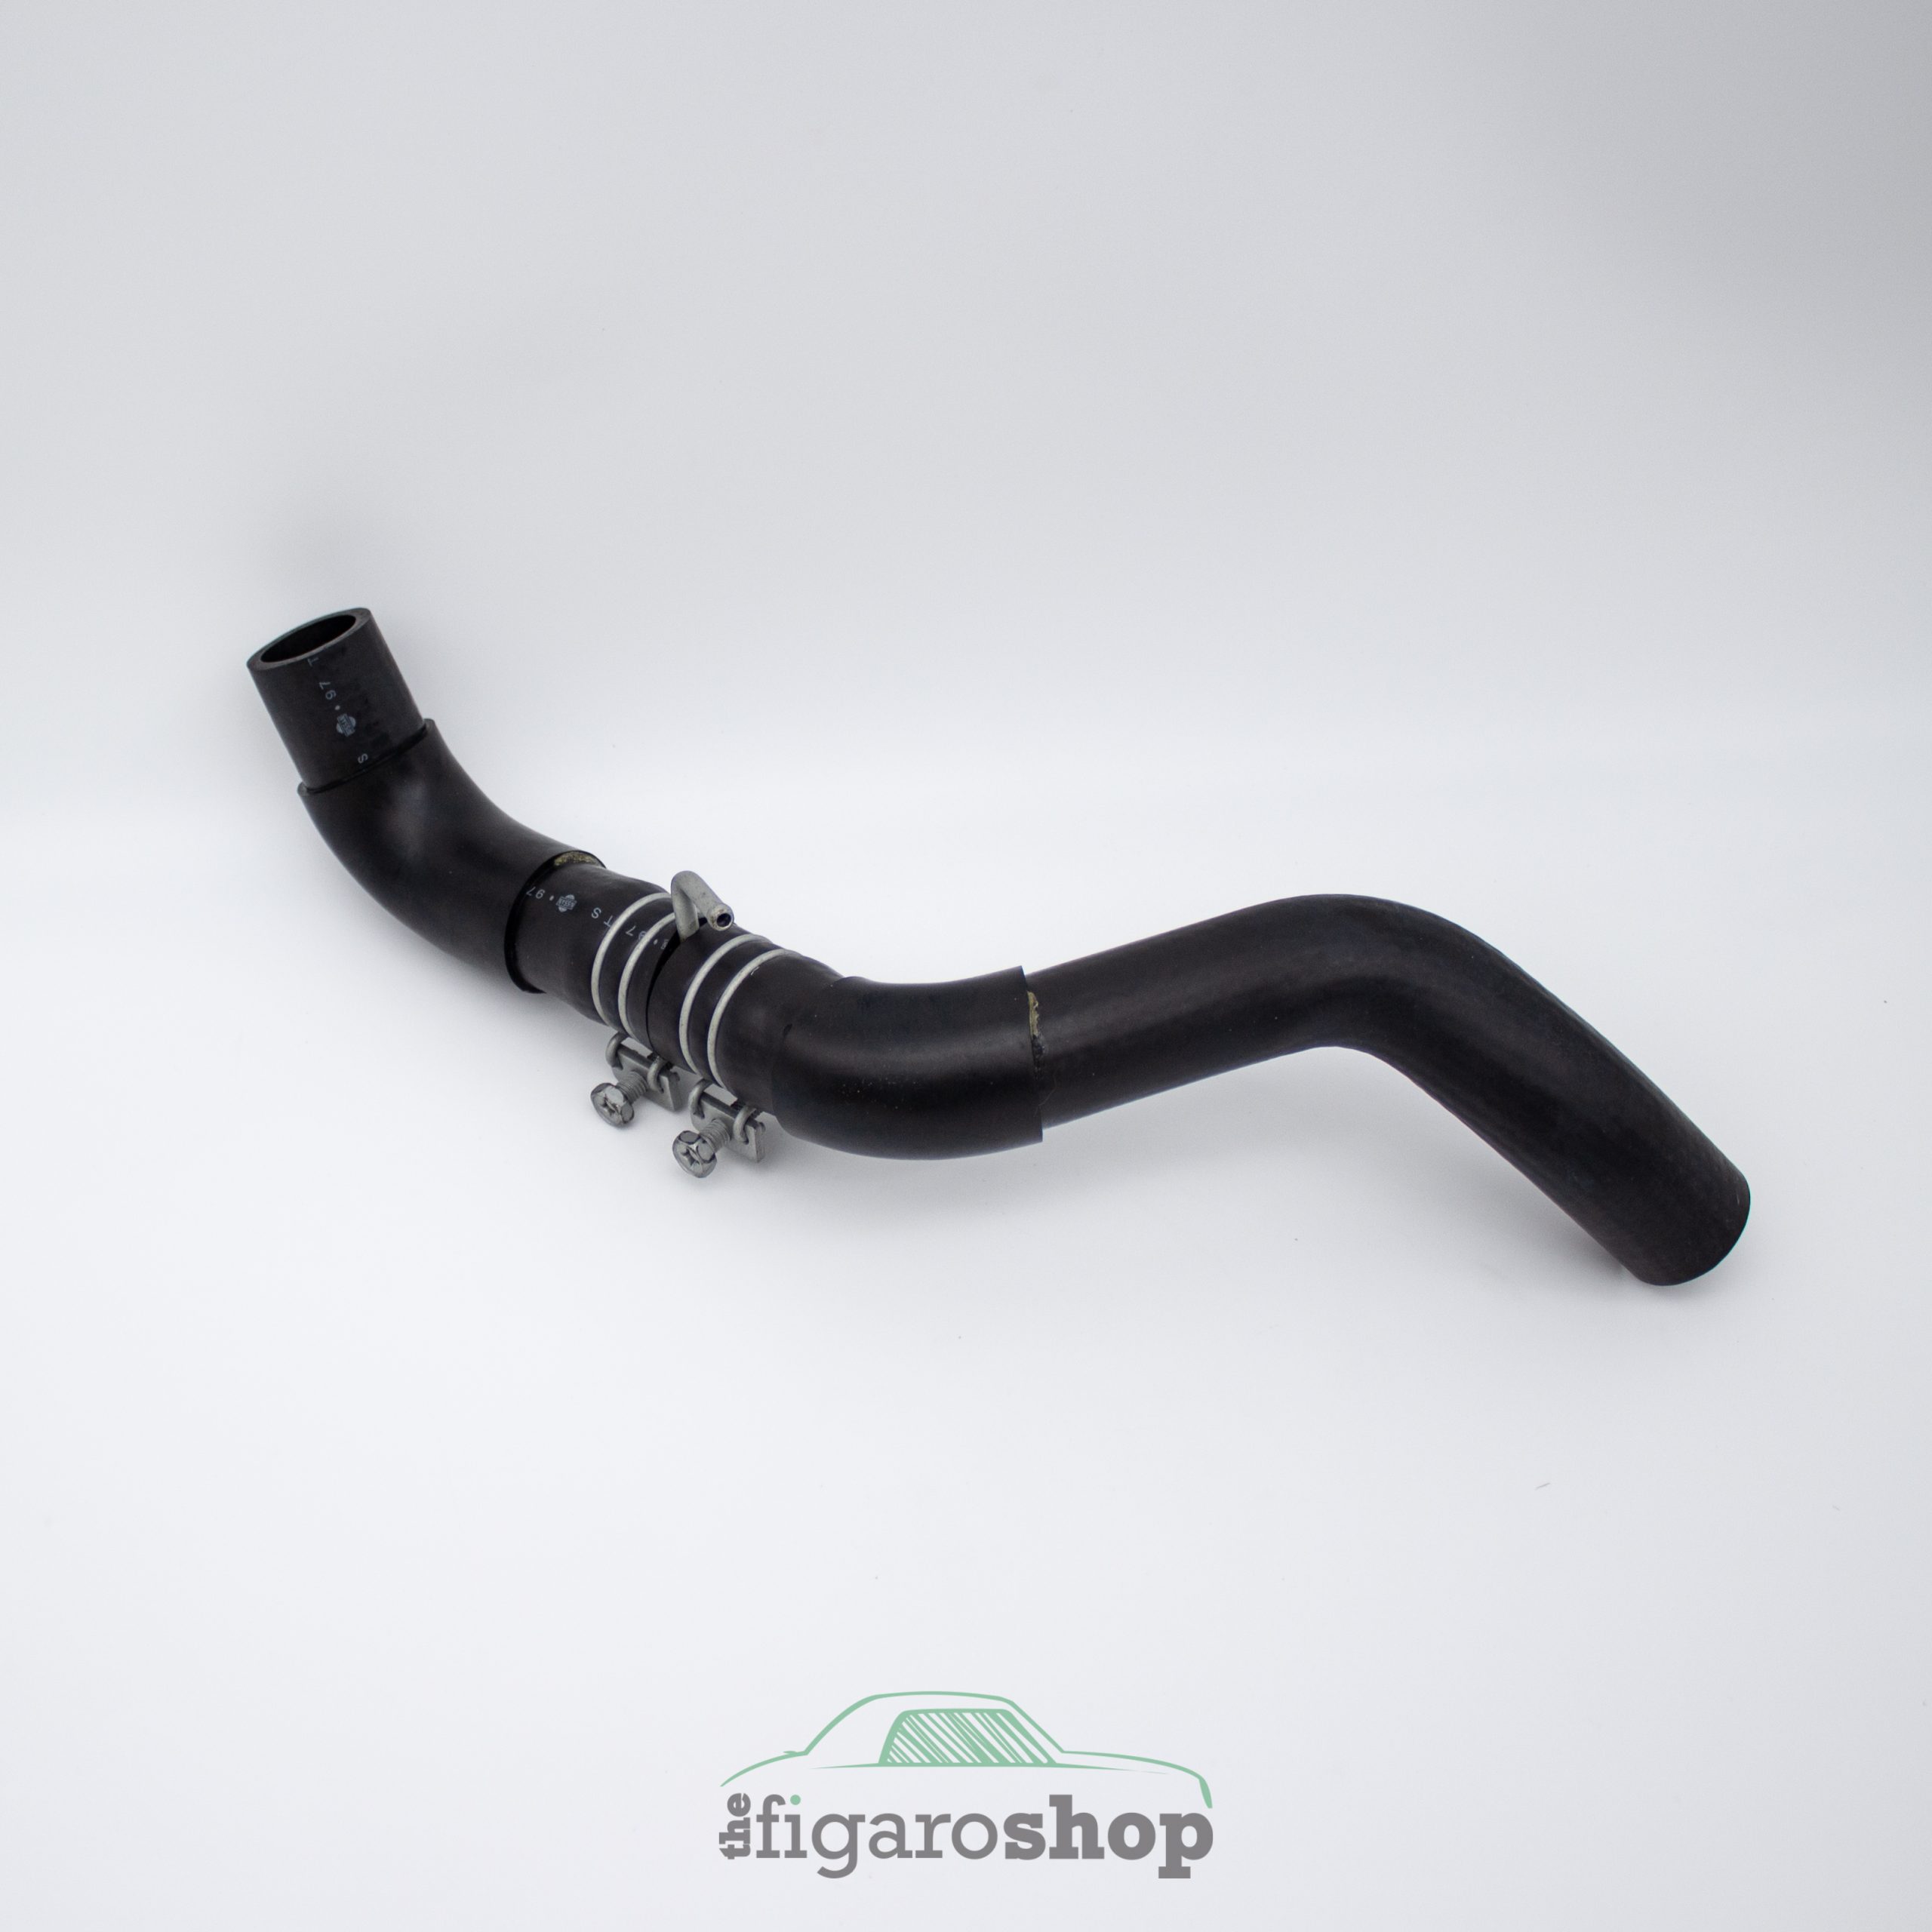 Nissan Figaro Radiator Top Hose - New - The Figaro Shop (Parts Department)